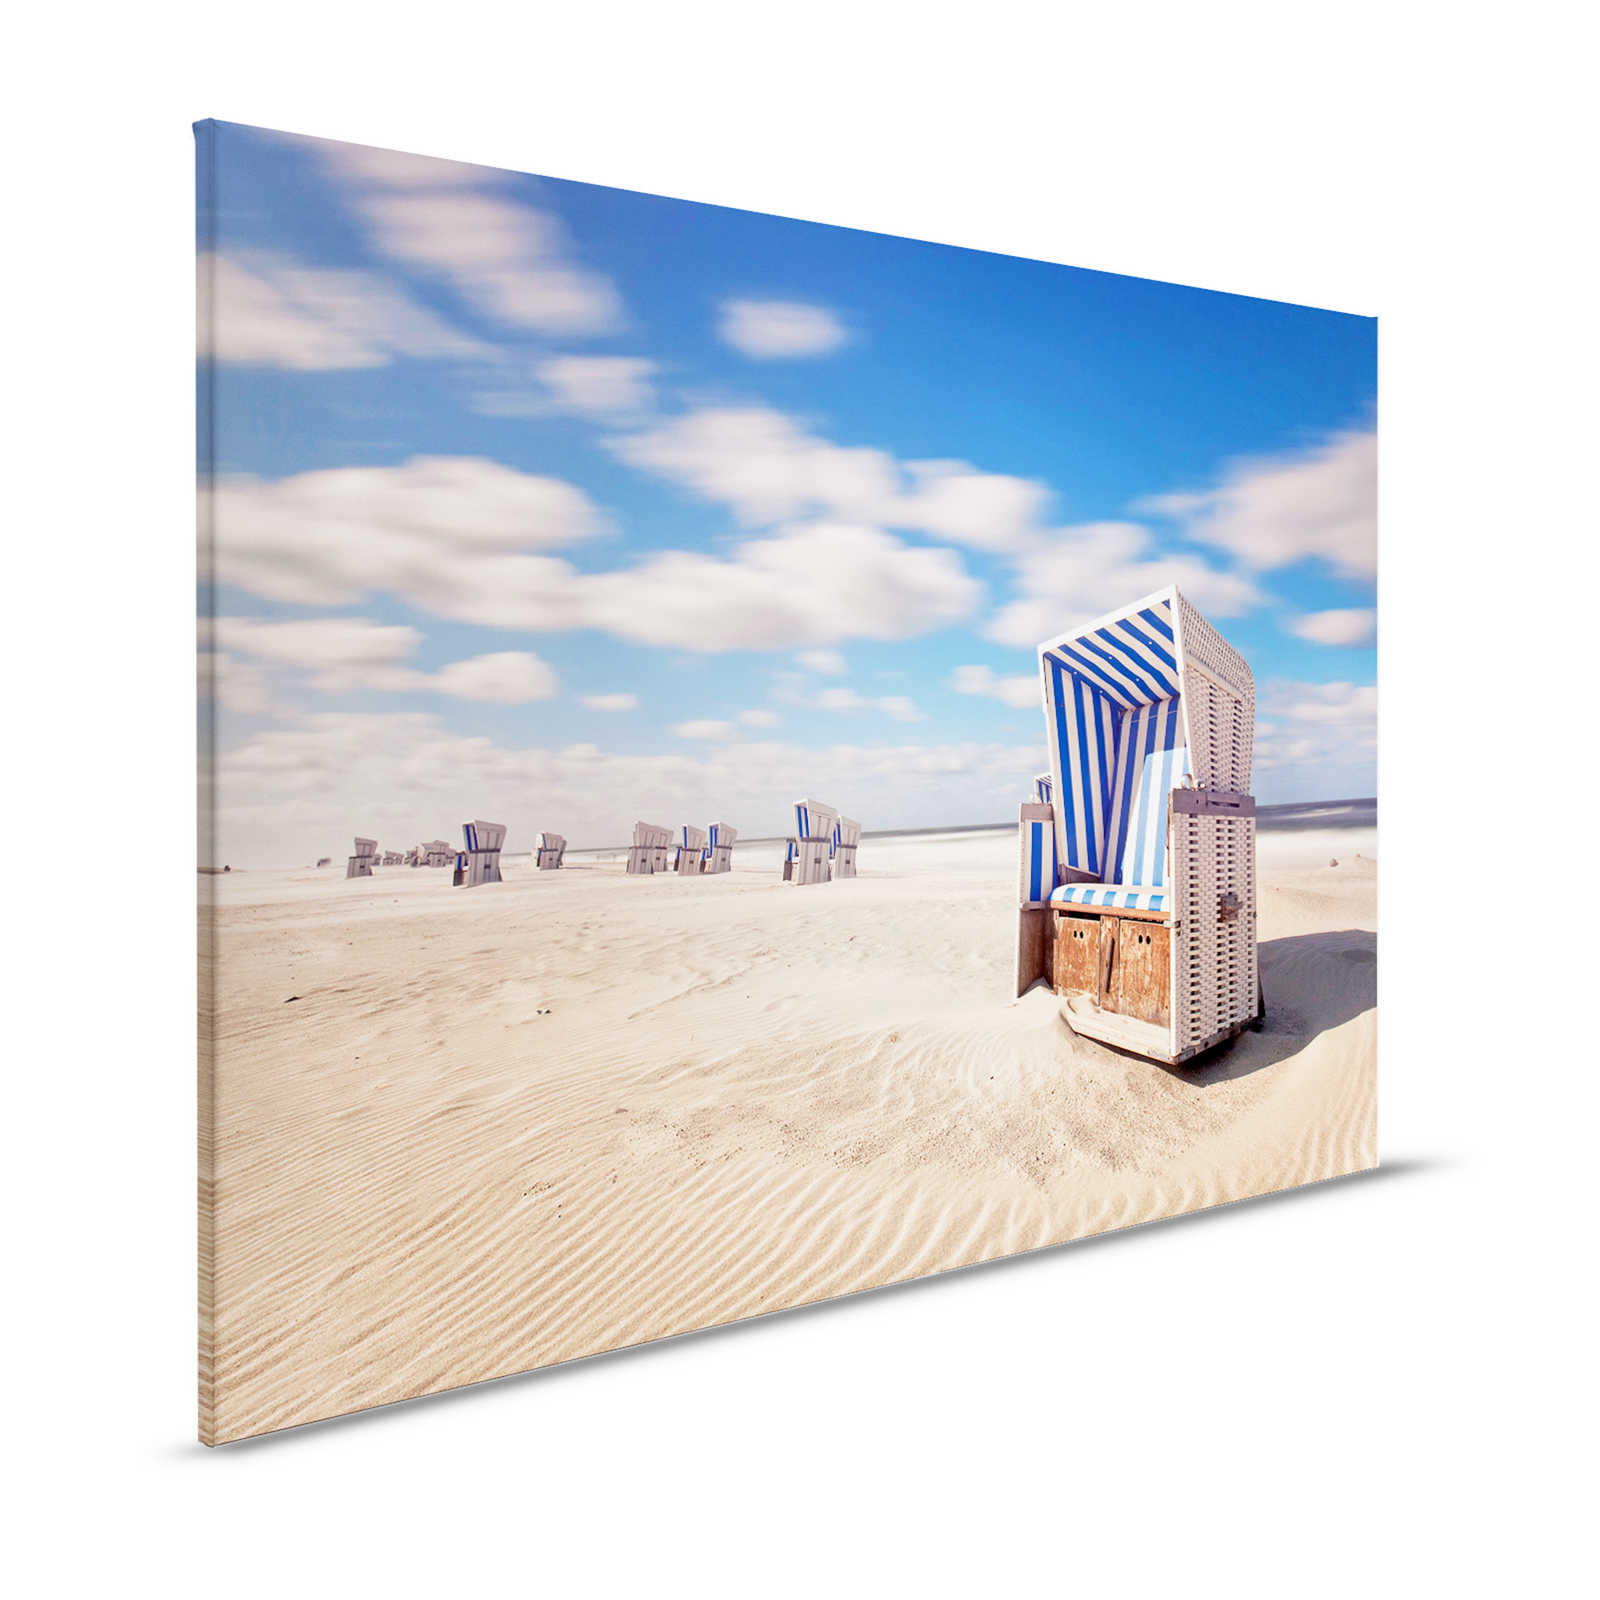 Beach Chair Canvas Painting Beach with Clouds Sky - 1.20 m x 0.80 m
